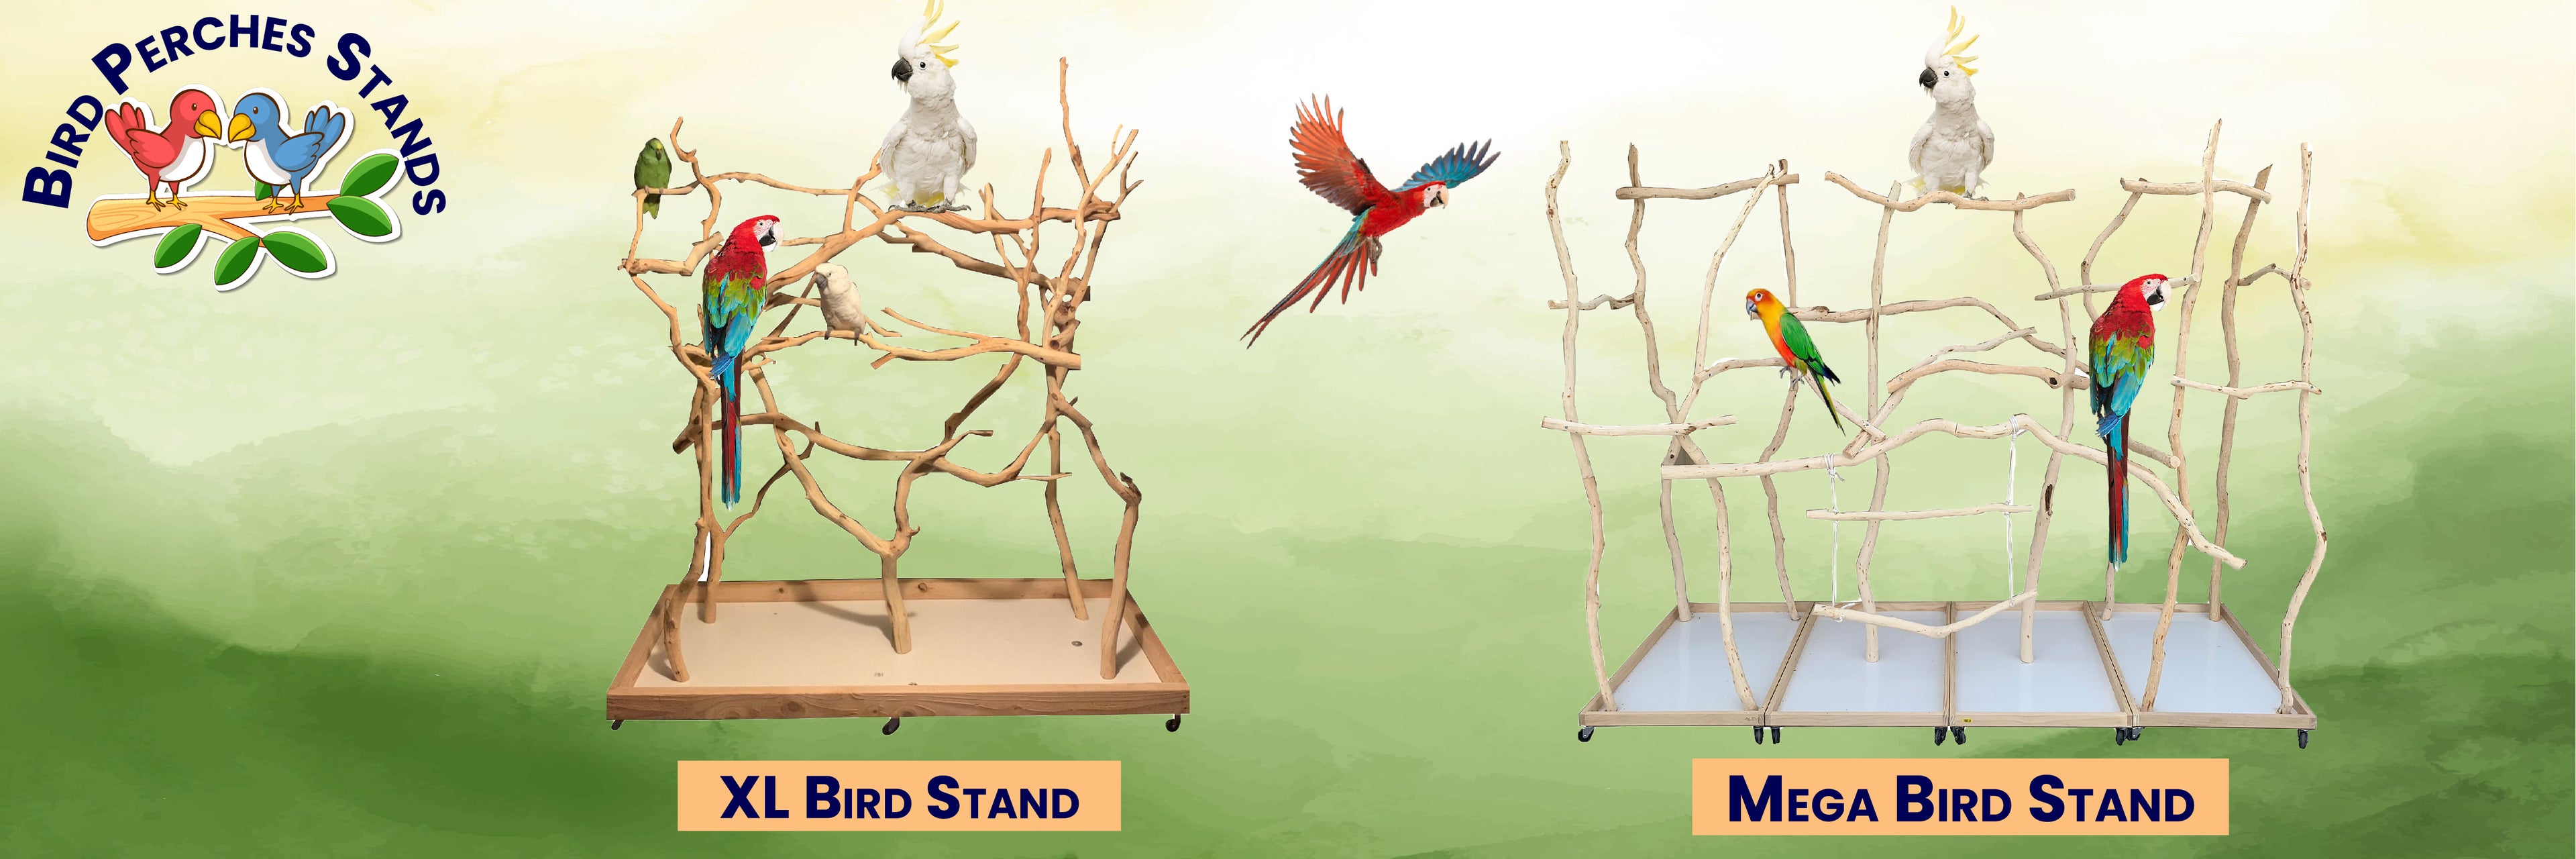 Exoticdad XL Bird Stand - Sanded Wood Perches for XL Birds Uniquely -  Handmade Assembled Bird Perches Stand 